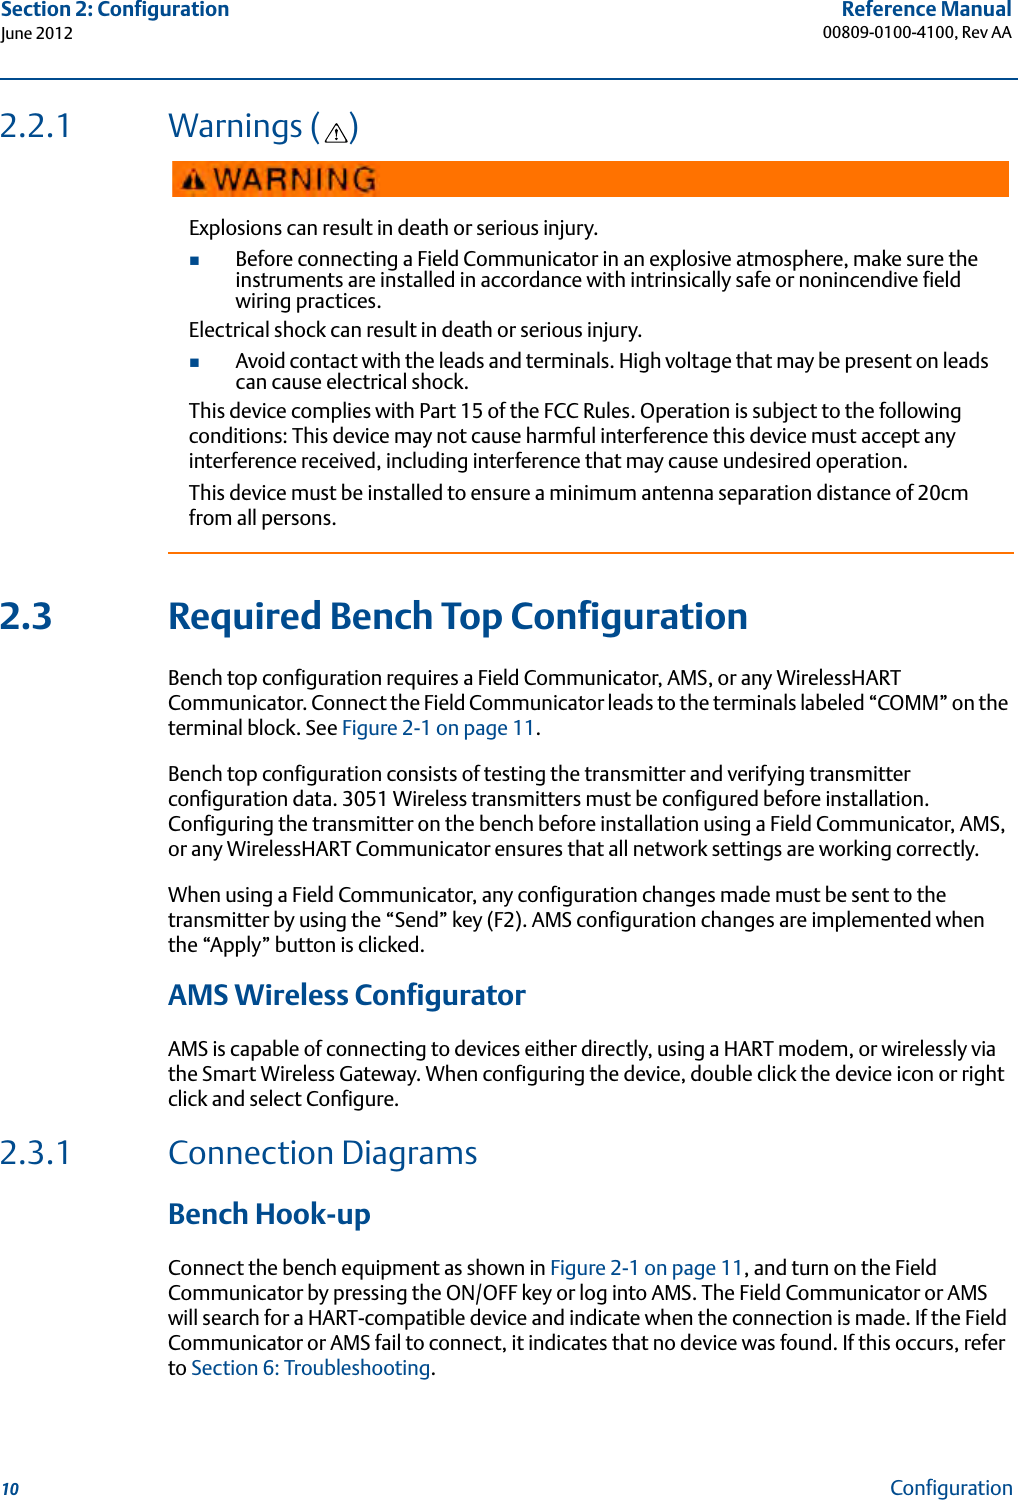 10Reference Manual00809-0100-4100, Rev AASection 2: ConfigurationJune 2012Configuration2.2.1 Warnings ( )2.3 Required Bench Top ConfigurationBench top configuration requires a Field Communicator, AMS, or any WirelessHART Communicator. Connect the Field Communicator leads to the terminals labeled “COMM” on the terminal block. See Figure 2-1 on page 11.Bench top configuration consists of testing the transmitter and verifying transmitter configuration data. 3051 Wireless transmitters must be configured before installation. Configuring the transmitter on the bench before installation using a Field Communicator, AMS, or any WirelessHART Communicator ensures that all network settings are working correctly.When using a Field Communicator, any configuration changes made must be sent to the transmitter by using the “Send” key (F2). AMS configuration changes are implemented when the “Apply” button is clicked.AMS Wireless ConfiguratorAMS is capable of connecting to devices either directly, using a HART modem, or wirelessly via the Smart Wireless Gateway. When configuring the device, double click the device icon or right click and select Configure.2.3.1 Connection Diagrams Bench Hook-upConnect the bench equipment as shown in Figure 2-1 on page 11, and turn on the Field Communicator by pressing the ON/OFF key or log into AMS. The Field Communicator or AMS will search for a HART-compatible device and indicate when the connection is made. If the Field Communicator or AMS fail to connect, it indicates that no device was found. If this occurs, refer to Section 6: Troubleshooting.Explosions can result in death or serious injury.Before connecting a Field Communicator in an explosive atmosphere, make sure the instruments are installed in accordance with intrinsically safe or nonincendive field wiring practices.Electrical shock can result in death or serious injury.Avoid contact with the leads and terminals. High voltage that may be present on leads can cause electrical shock.This device complies with Part 15 of the FCC Rules. Operation is subject to the following conditions: This device may not cause harmful interference this device must accept any interference received, including interference that may cause undesired operation.This device must be installed to ensure a minimum antenna separation distance of 20cm from all persons.